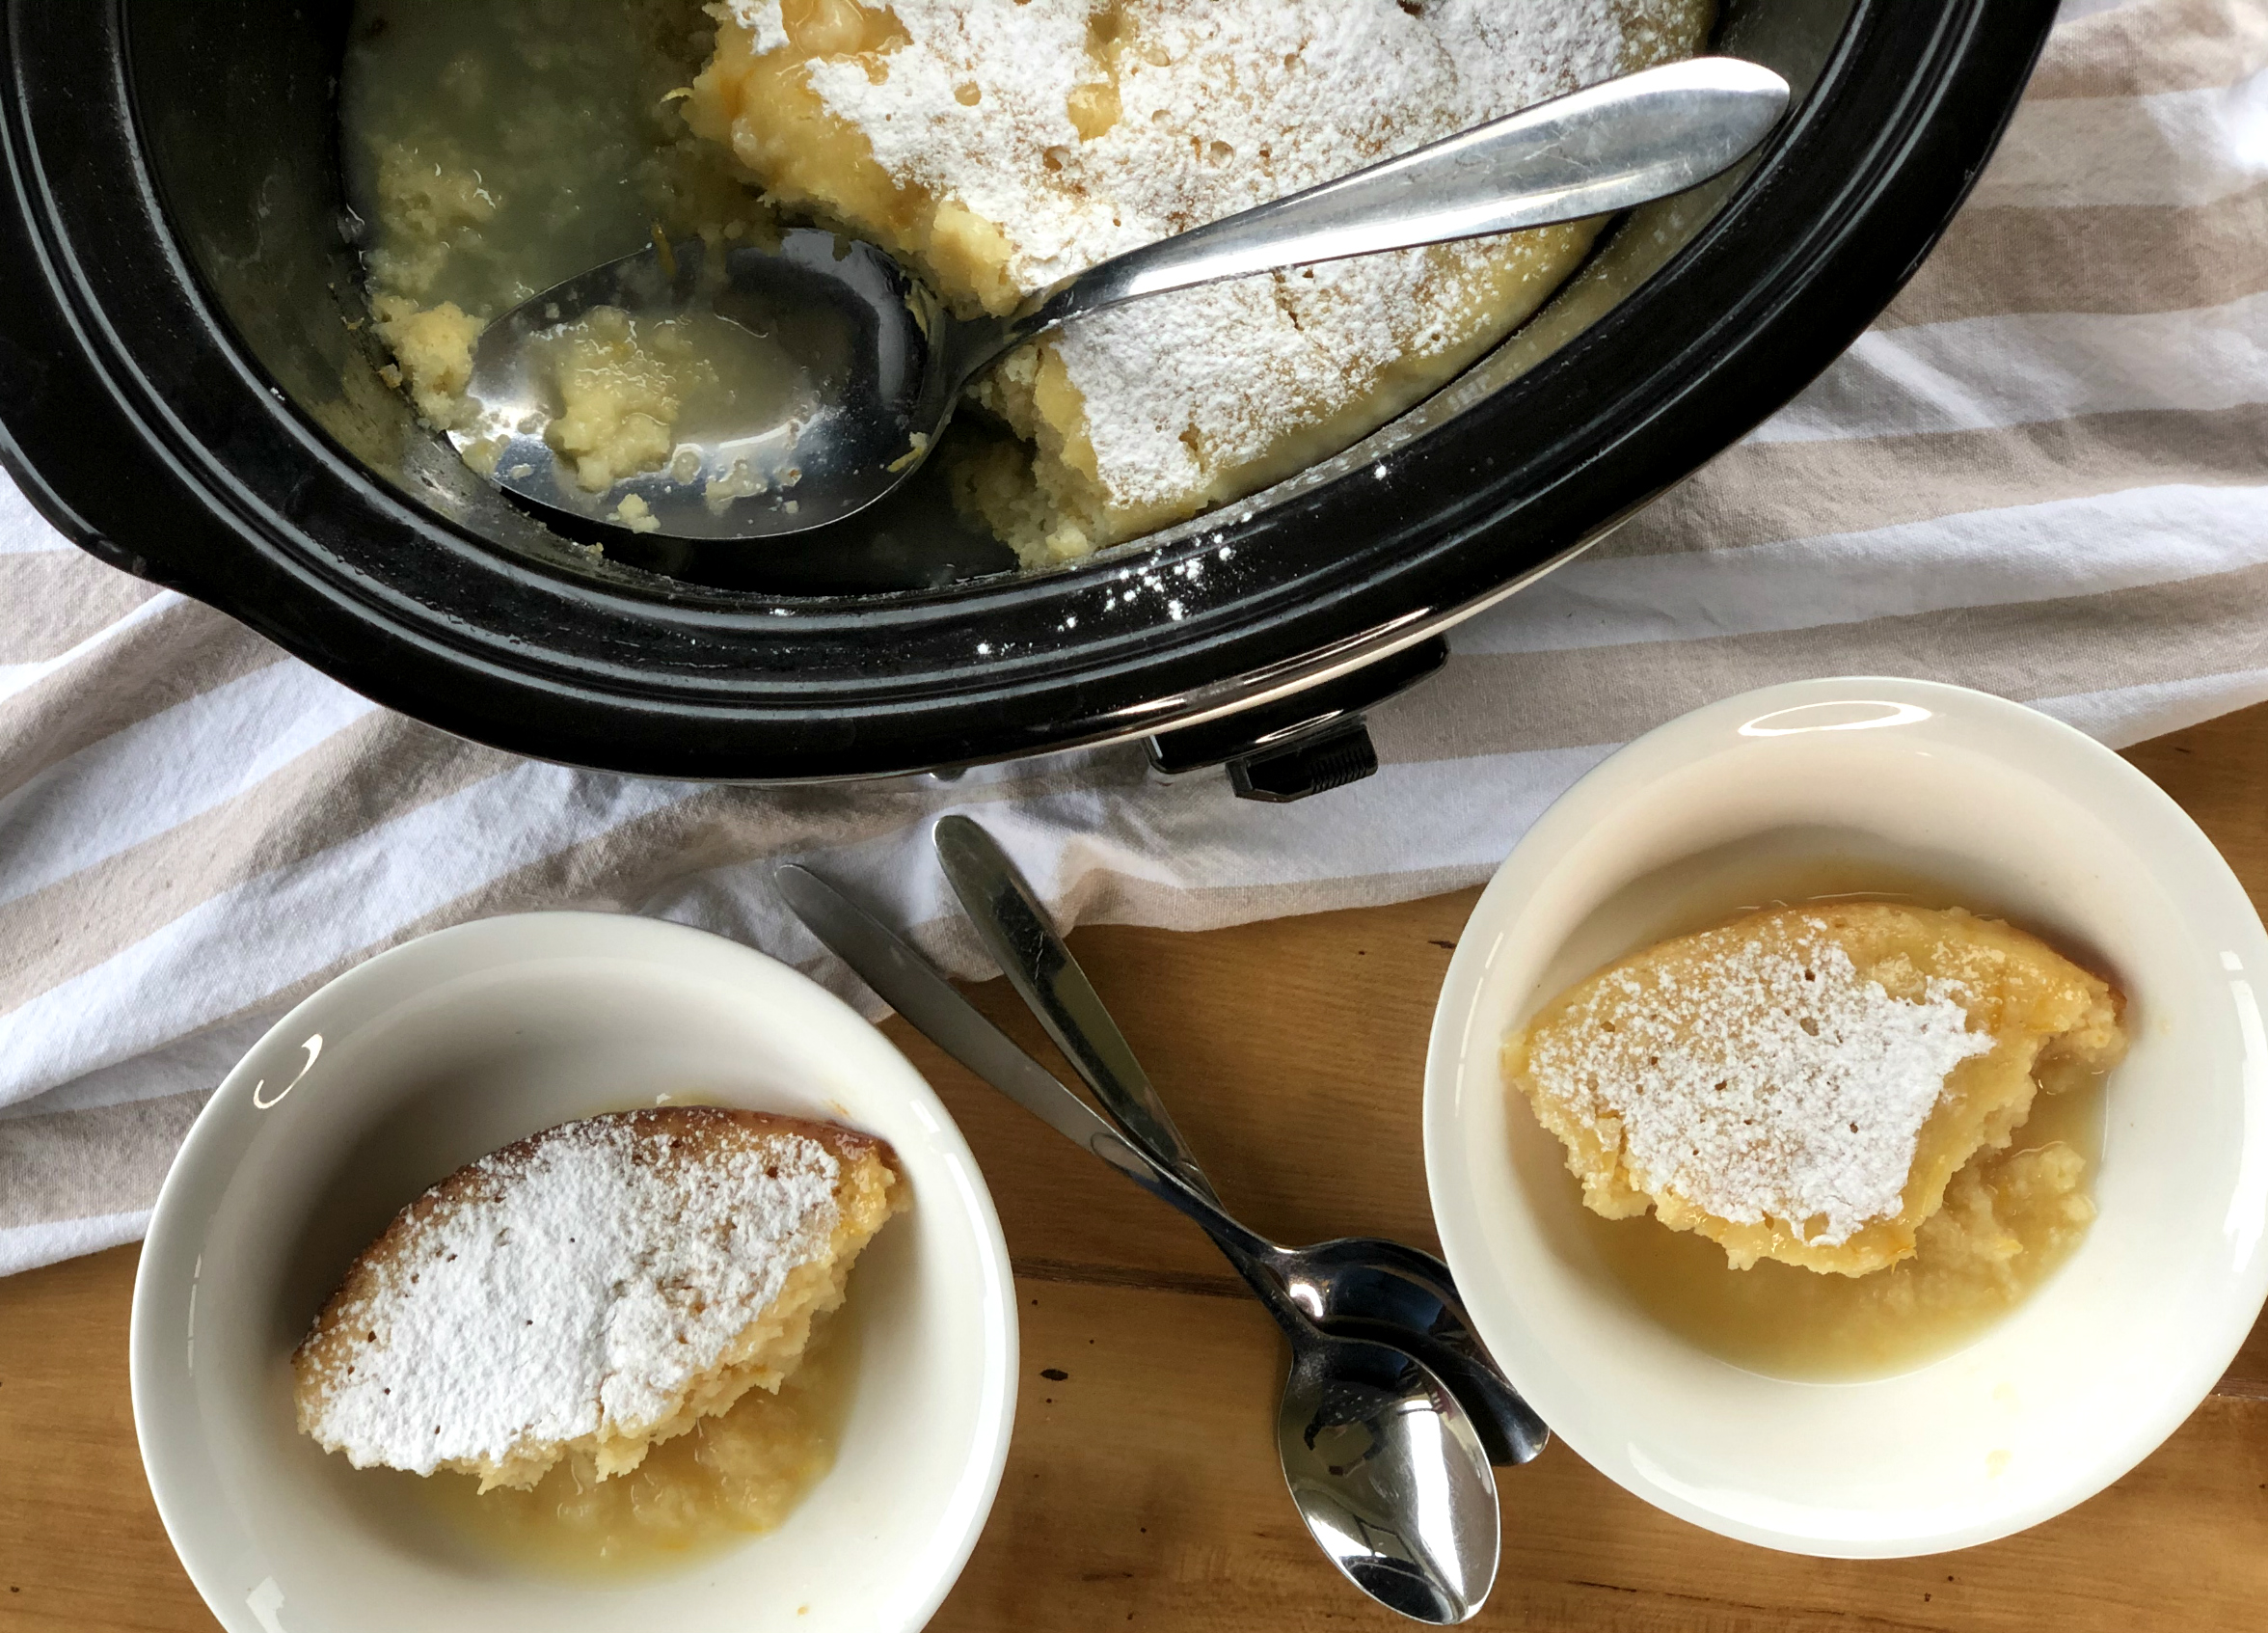 Two scoops of lemon dessert and the slow cooker